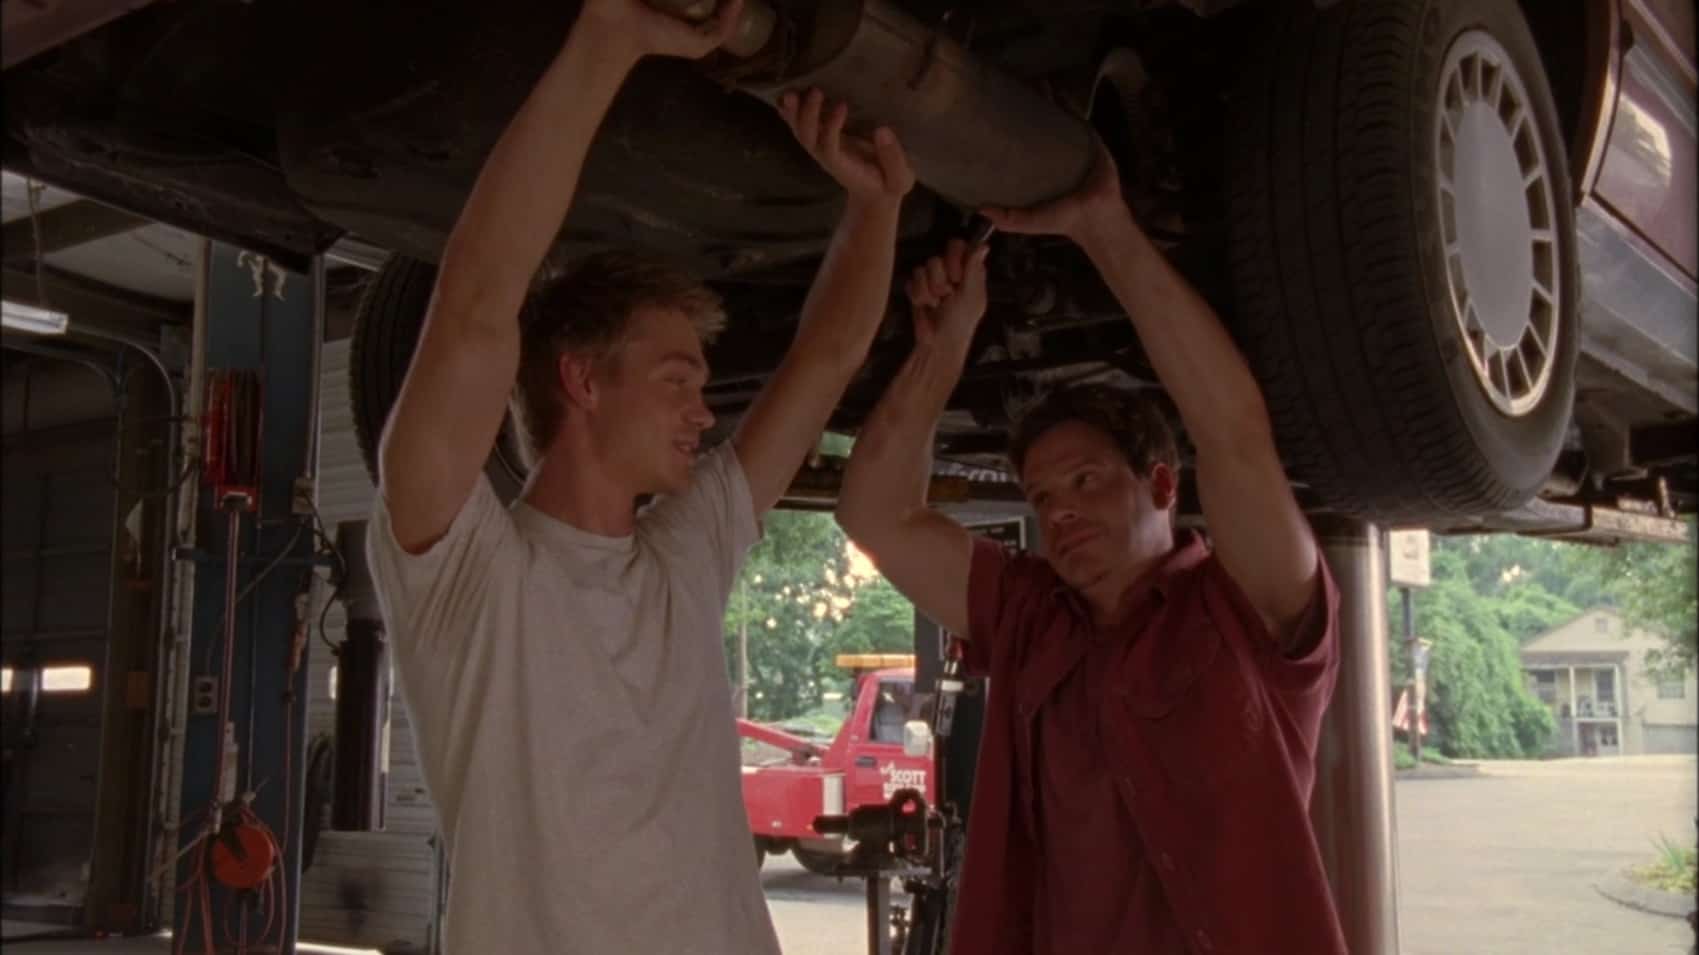 Two men stand under a car in an auto shop in this image from Tollin/Robbins Productions.